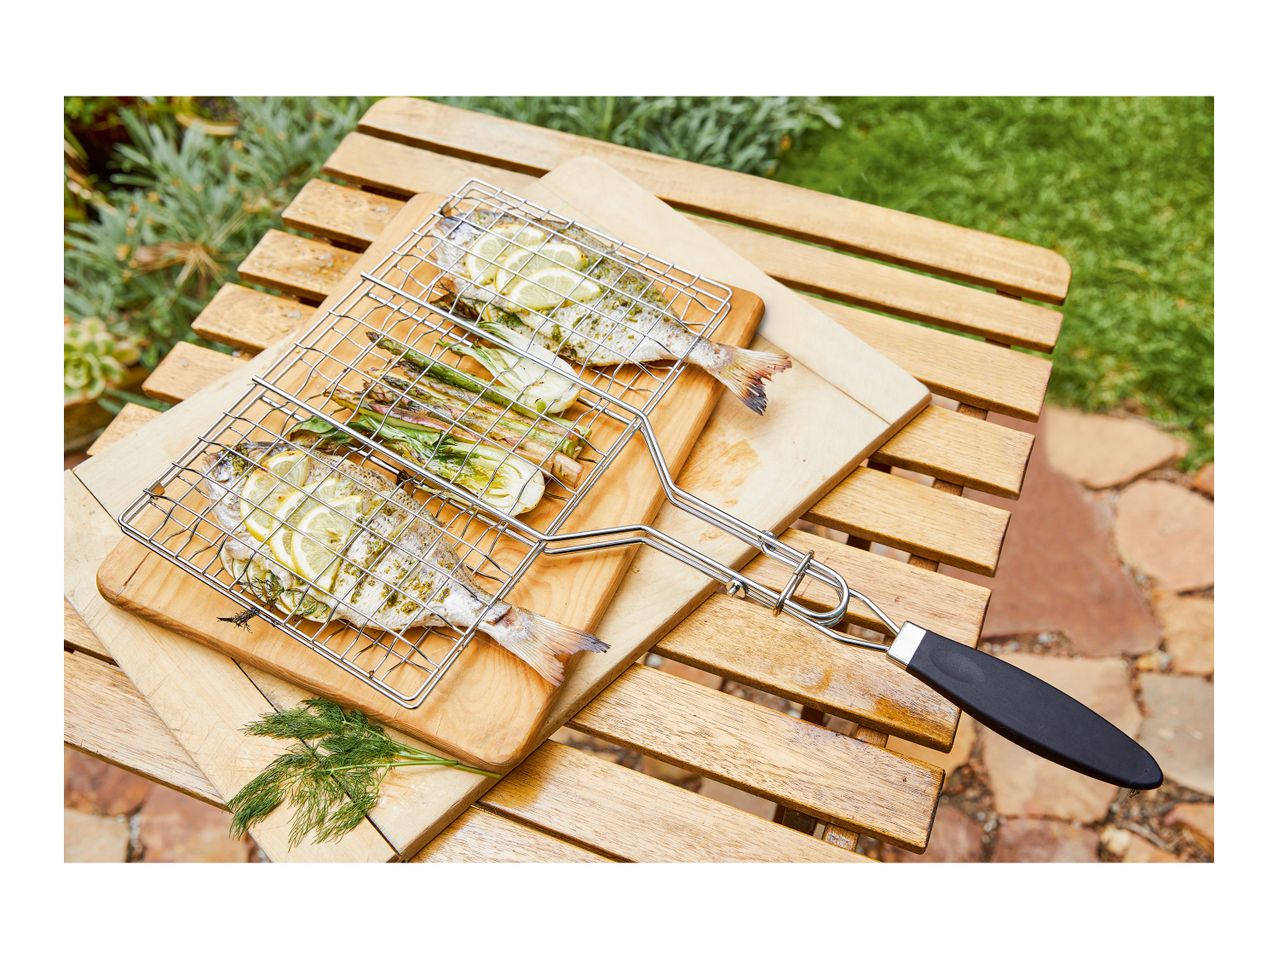 Go to full screen view: Grillmeister BBQ Basket - Image 11